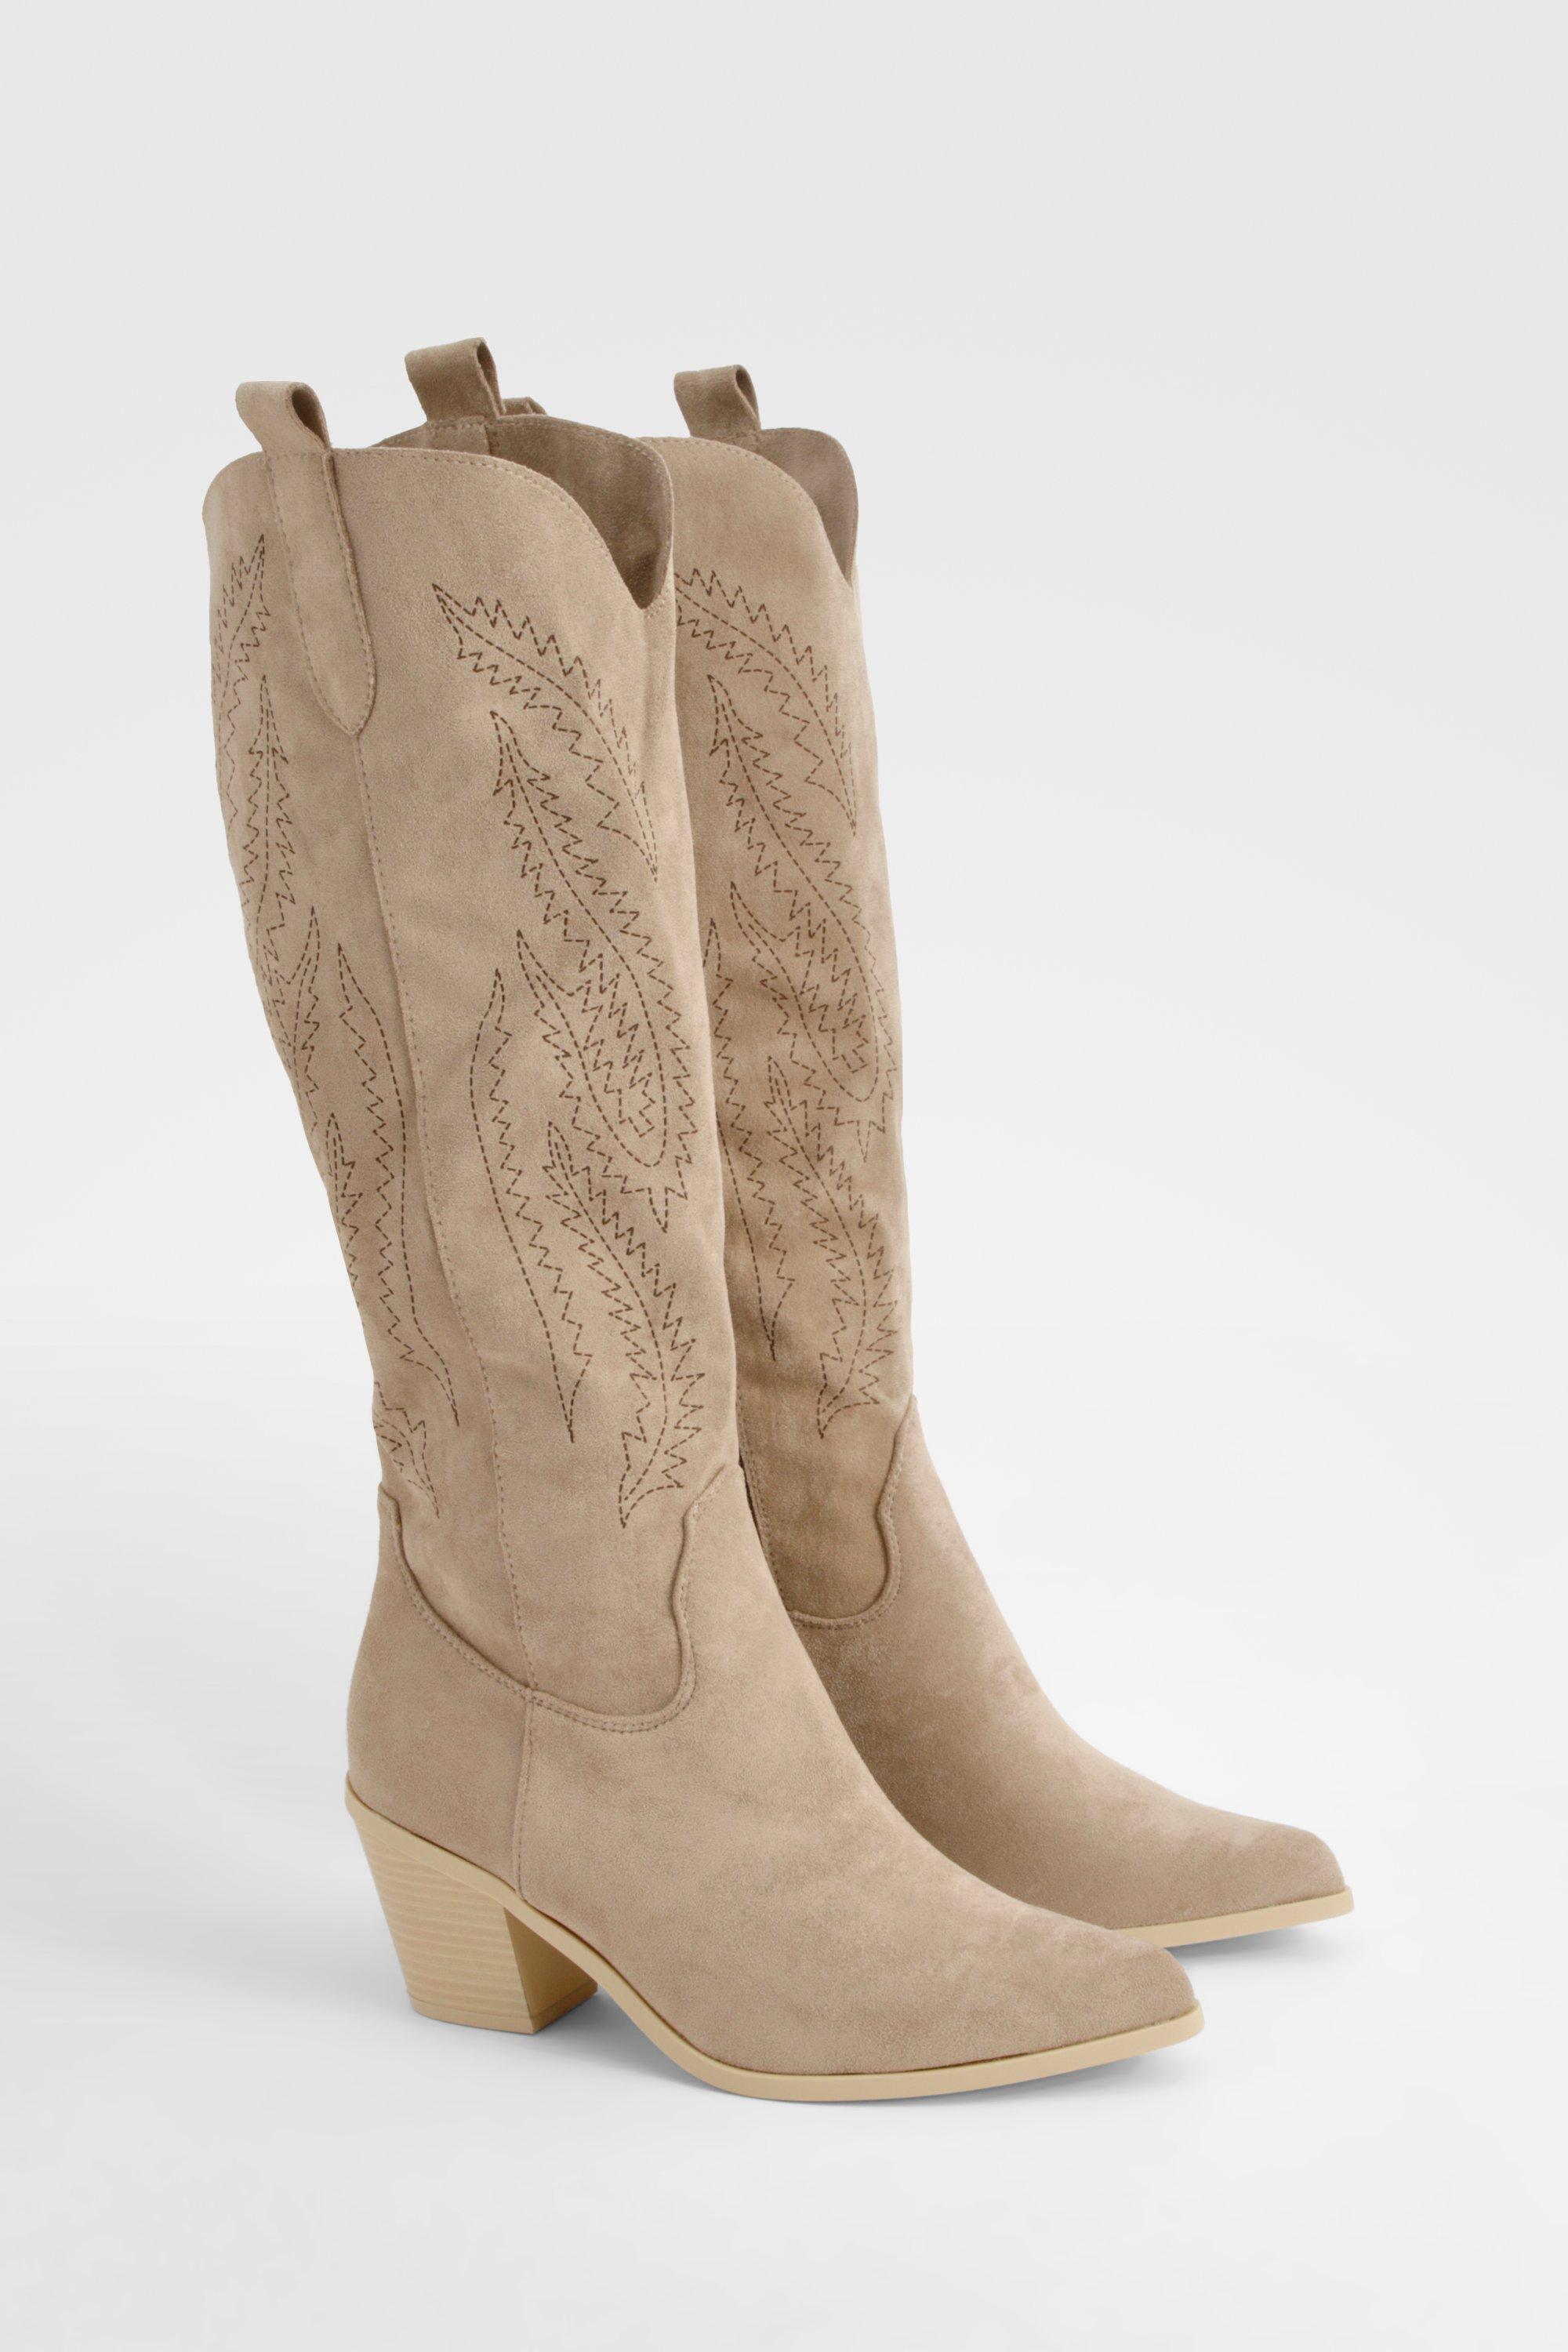 Boohoo Embroidered Calf High Western Boots, Taupe